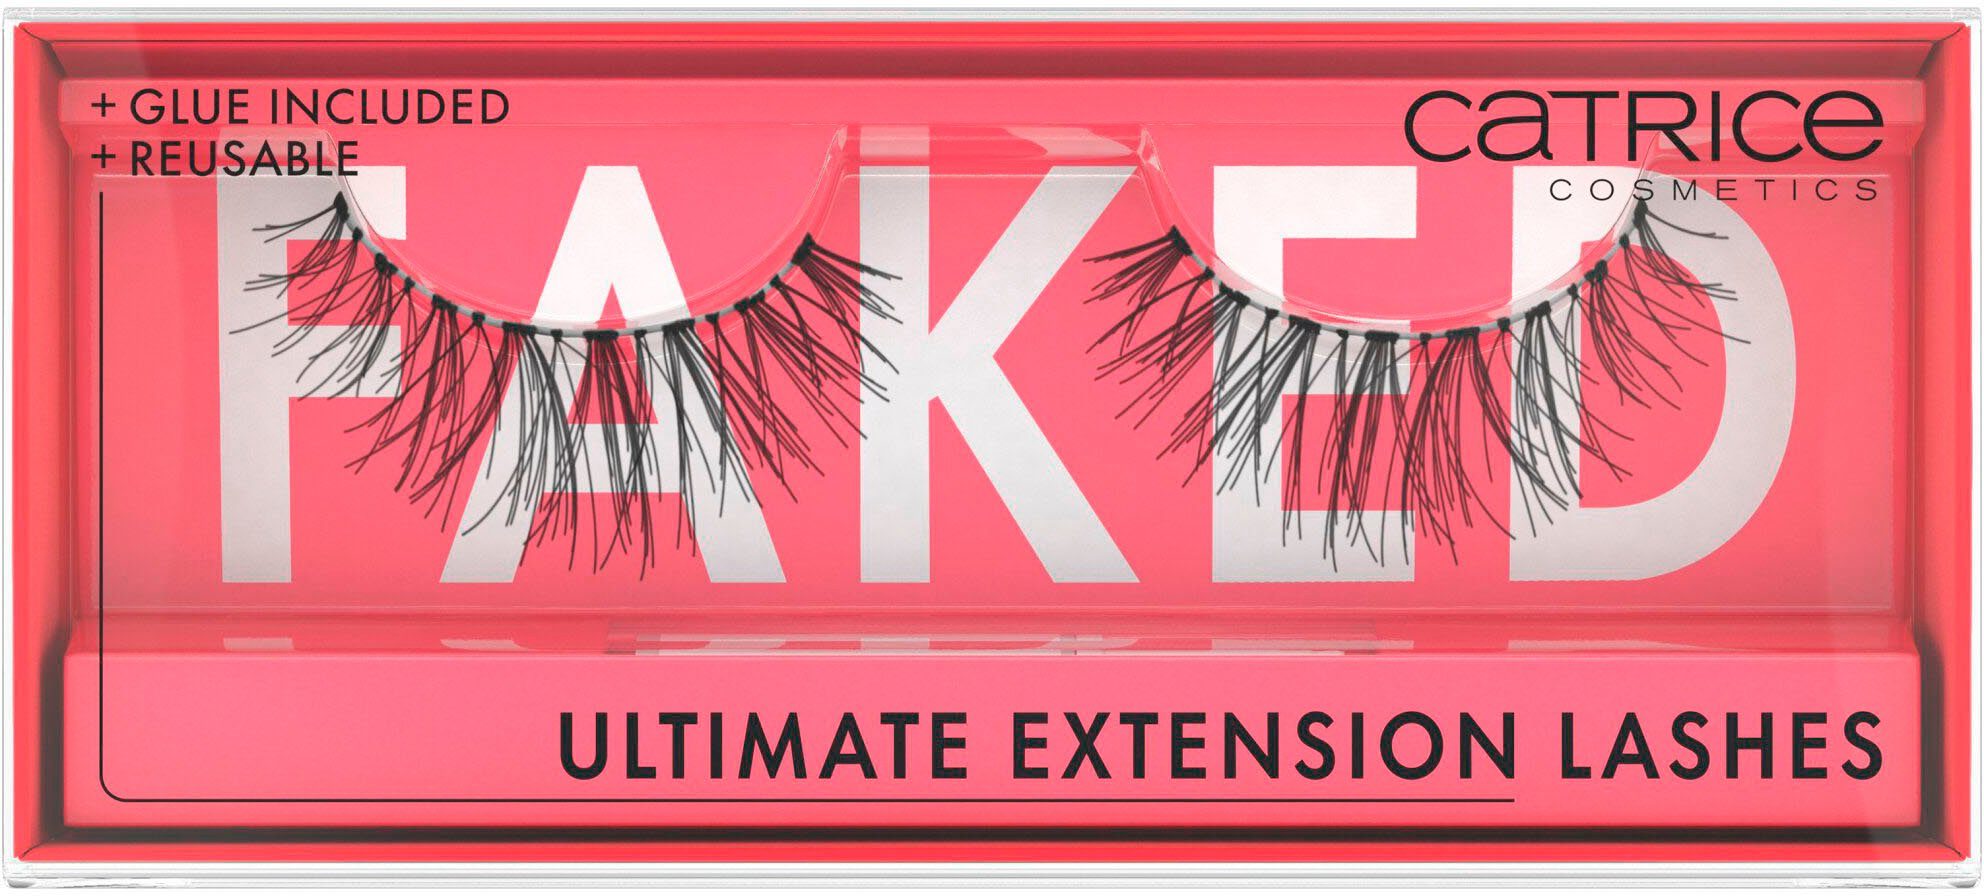 Bandwimpern 3 Extension Lashes, tlg. Set, Ultimate Catrice Faked